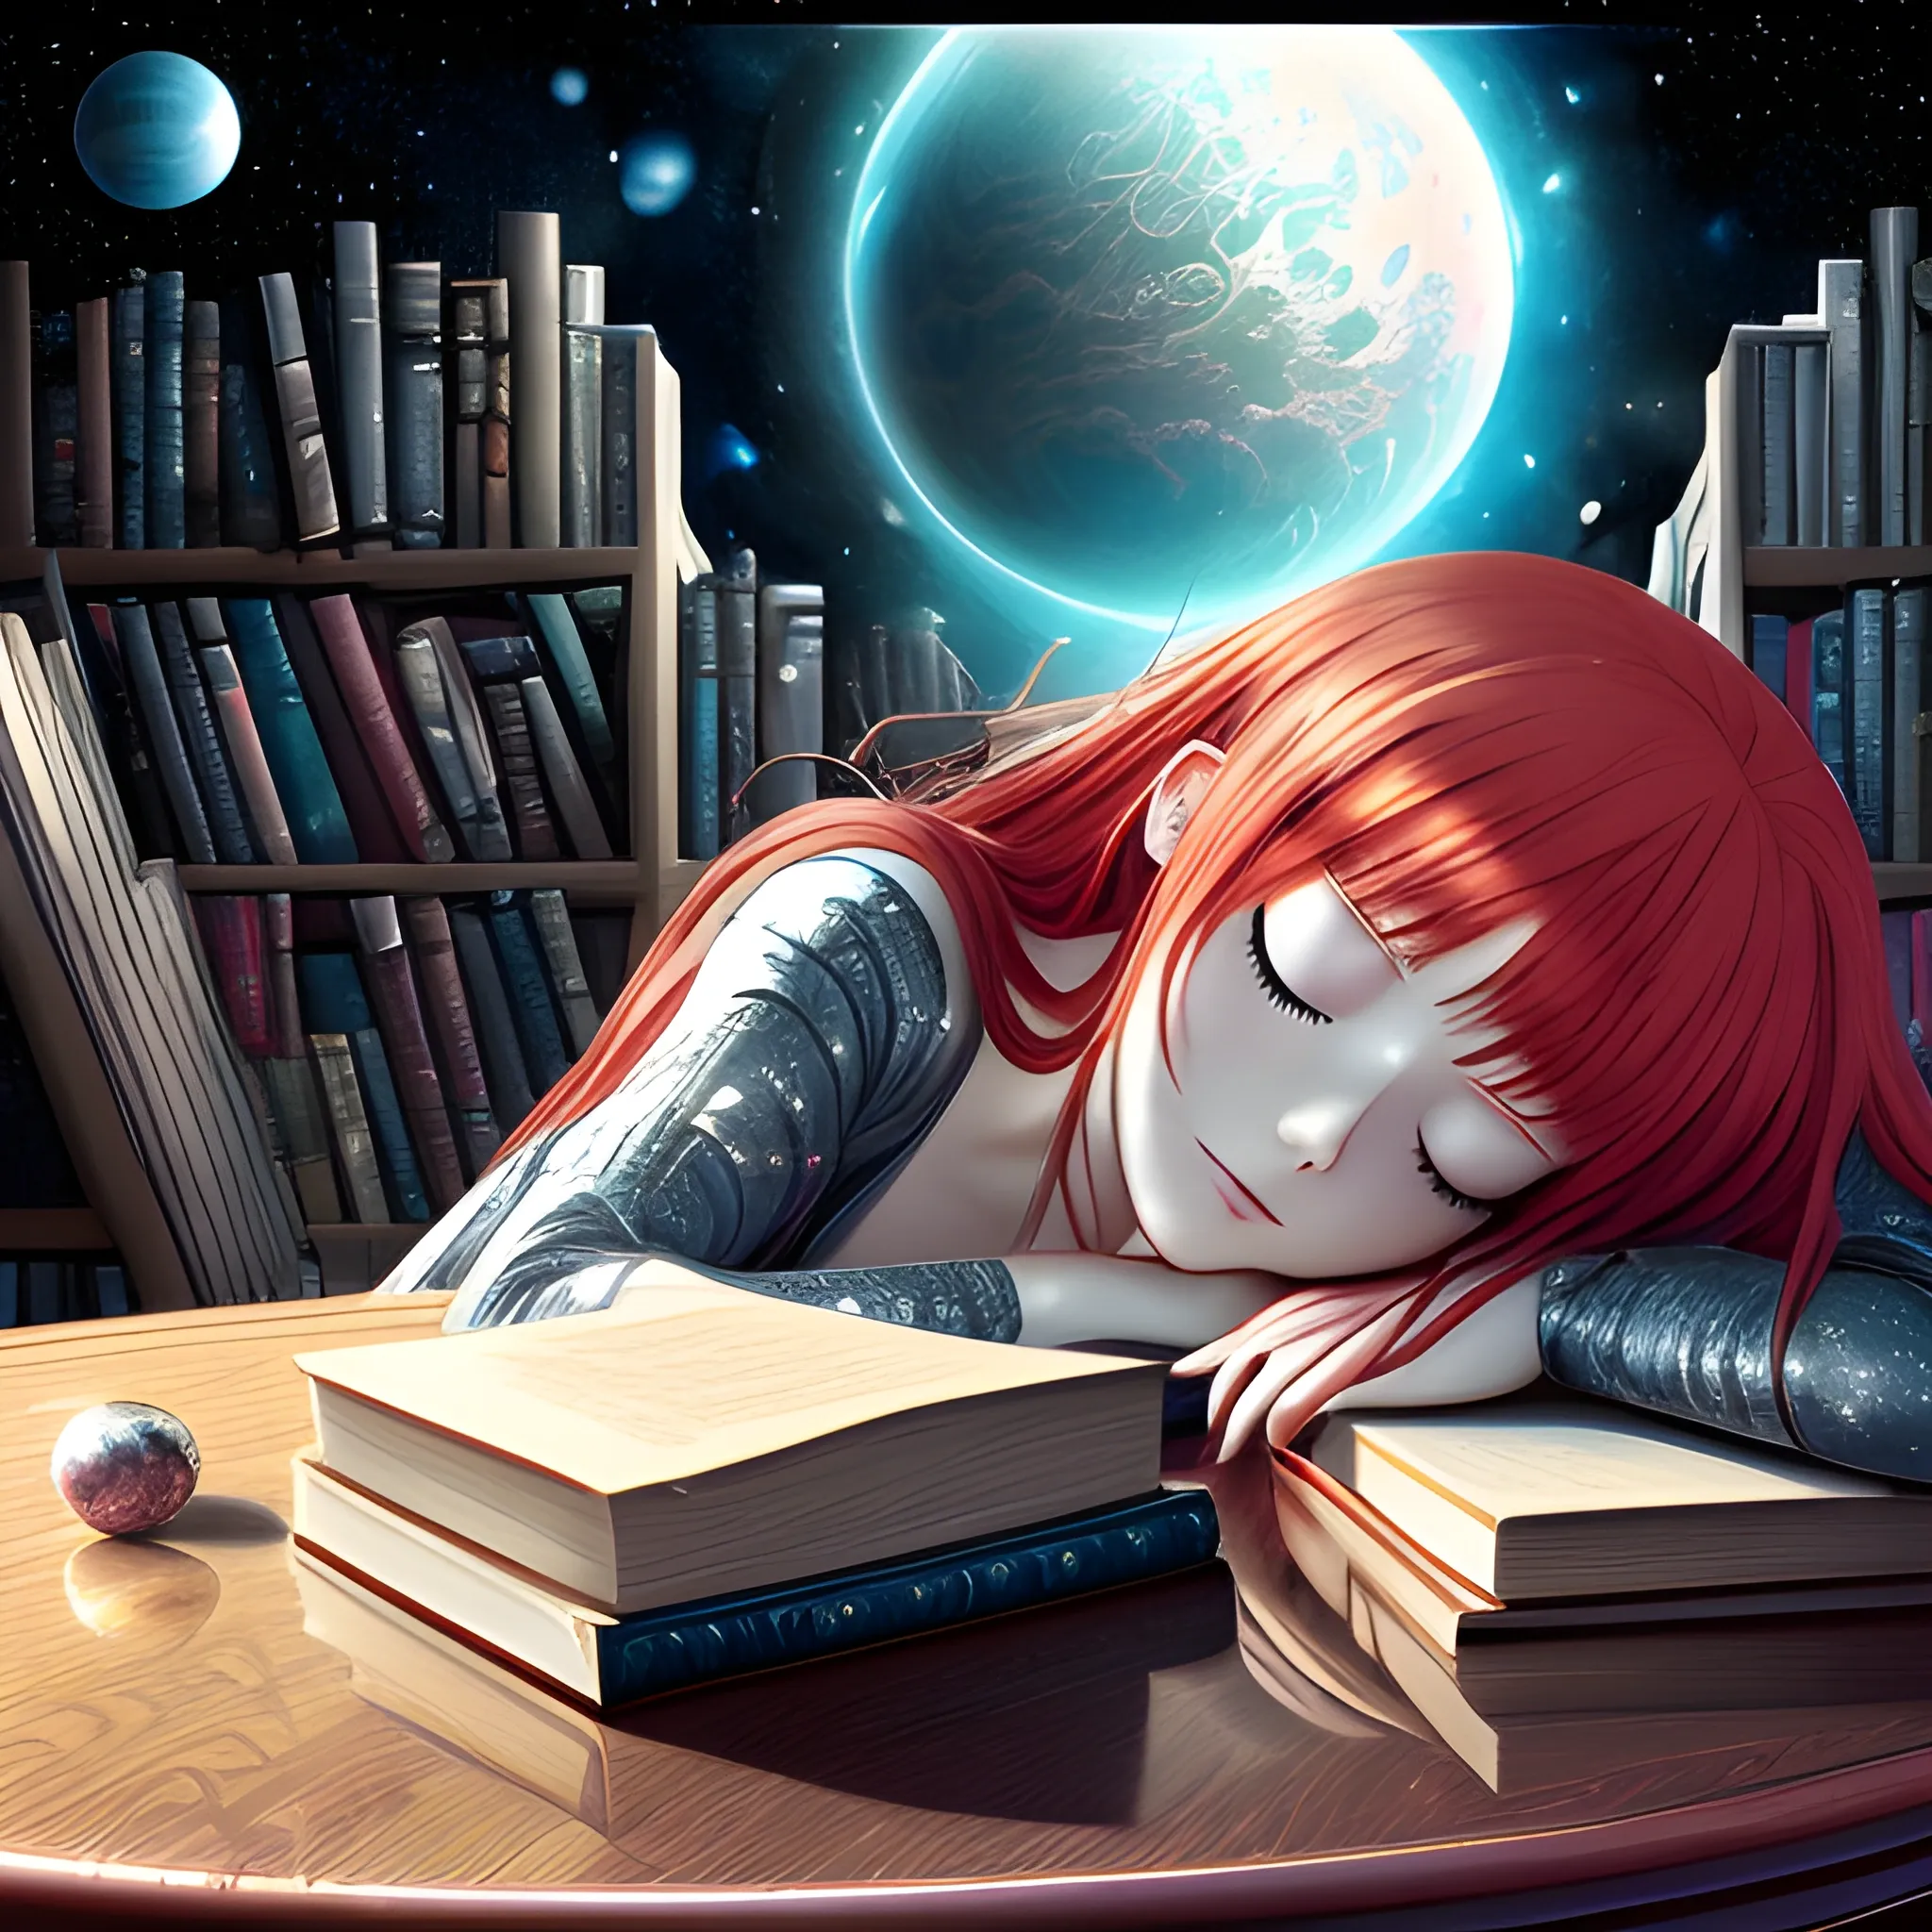 (((high detail))), best quality, (detailed), (high resolution) silver universe, books, books on a table, shelf with some books, studio ghiblin, anime, galaxy in the sky, woman sleeping on it,red hair, red dress, big black eyes 
 
, Trippy, 
